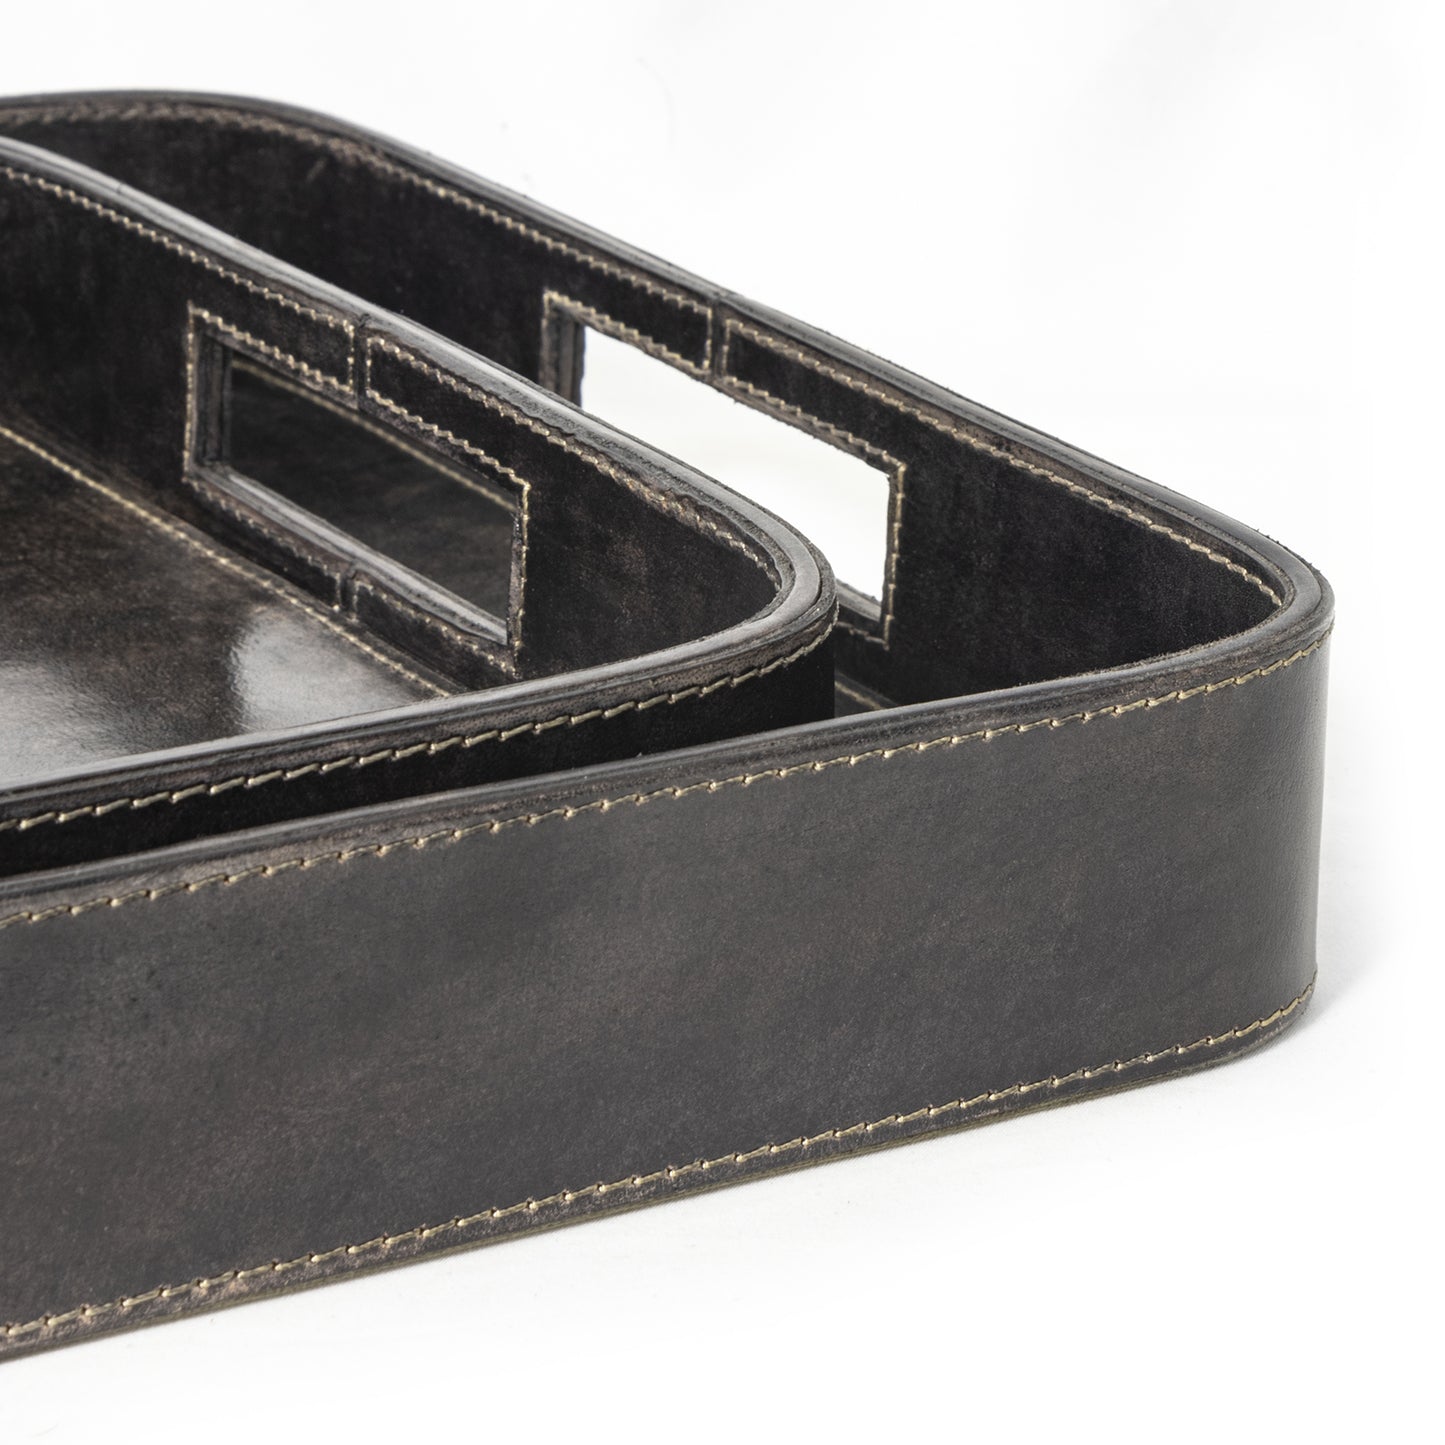 Derby Rectangle Leather Tray Set in Black by Regina Andrew